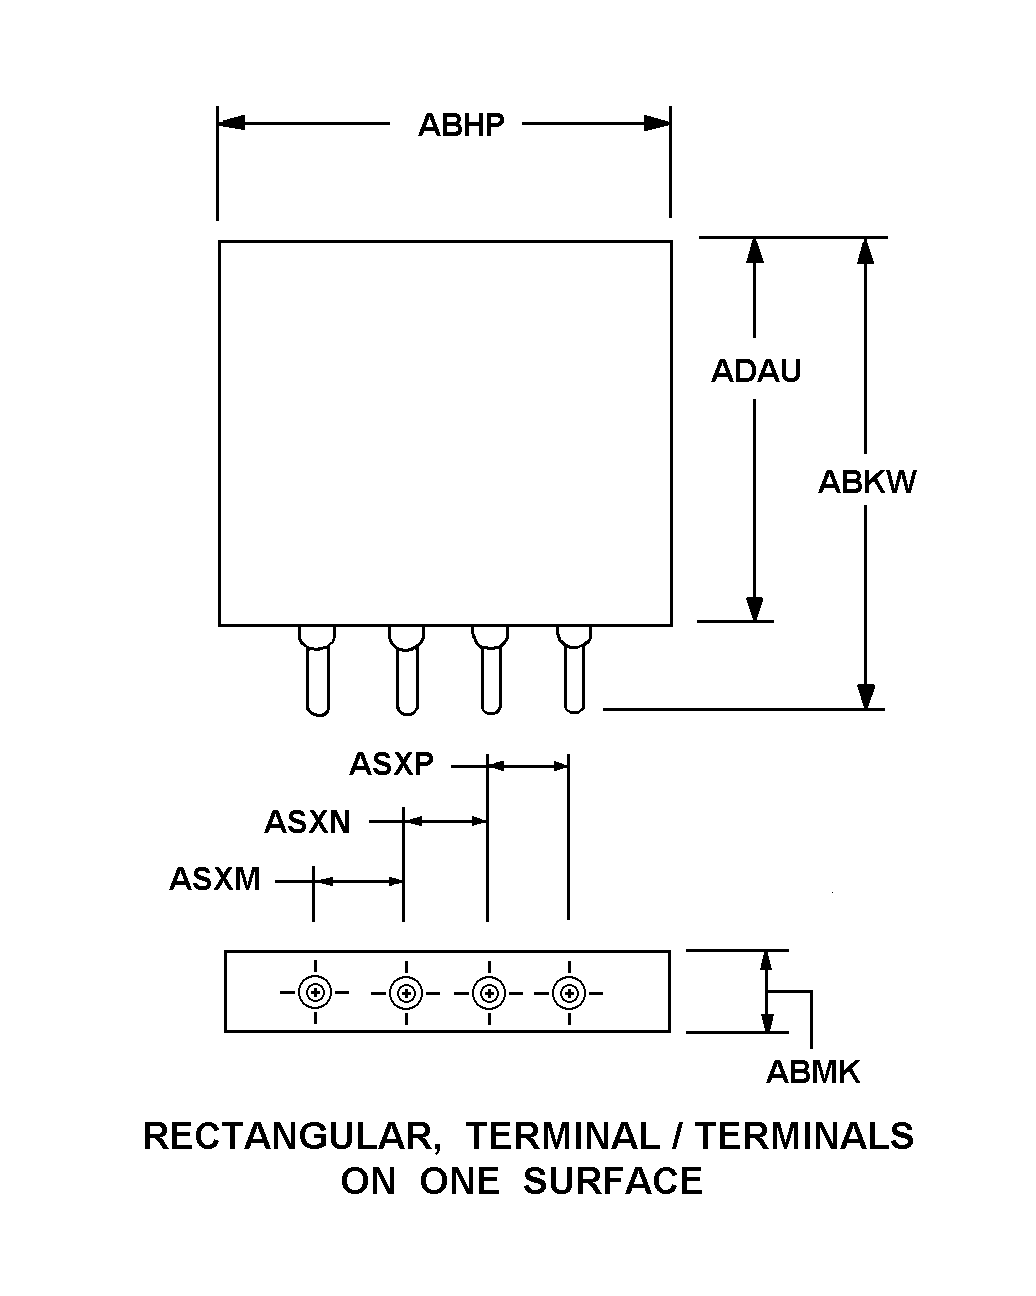 RECTANGULAR, TERMINAL/TERMINALS ON ONE SURFACE style nsn 5985-01-274-6609